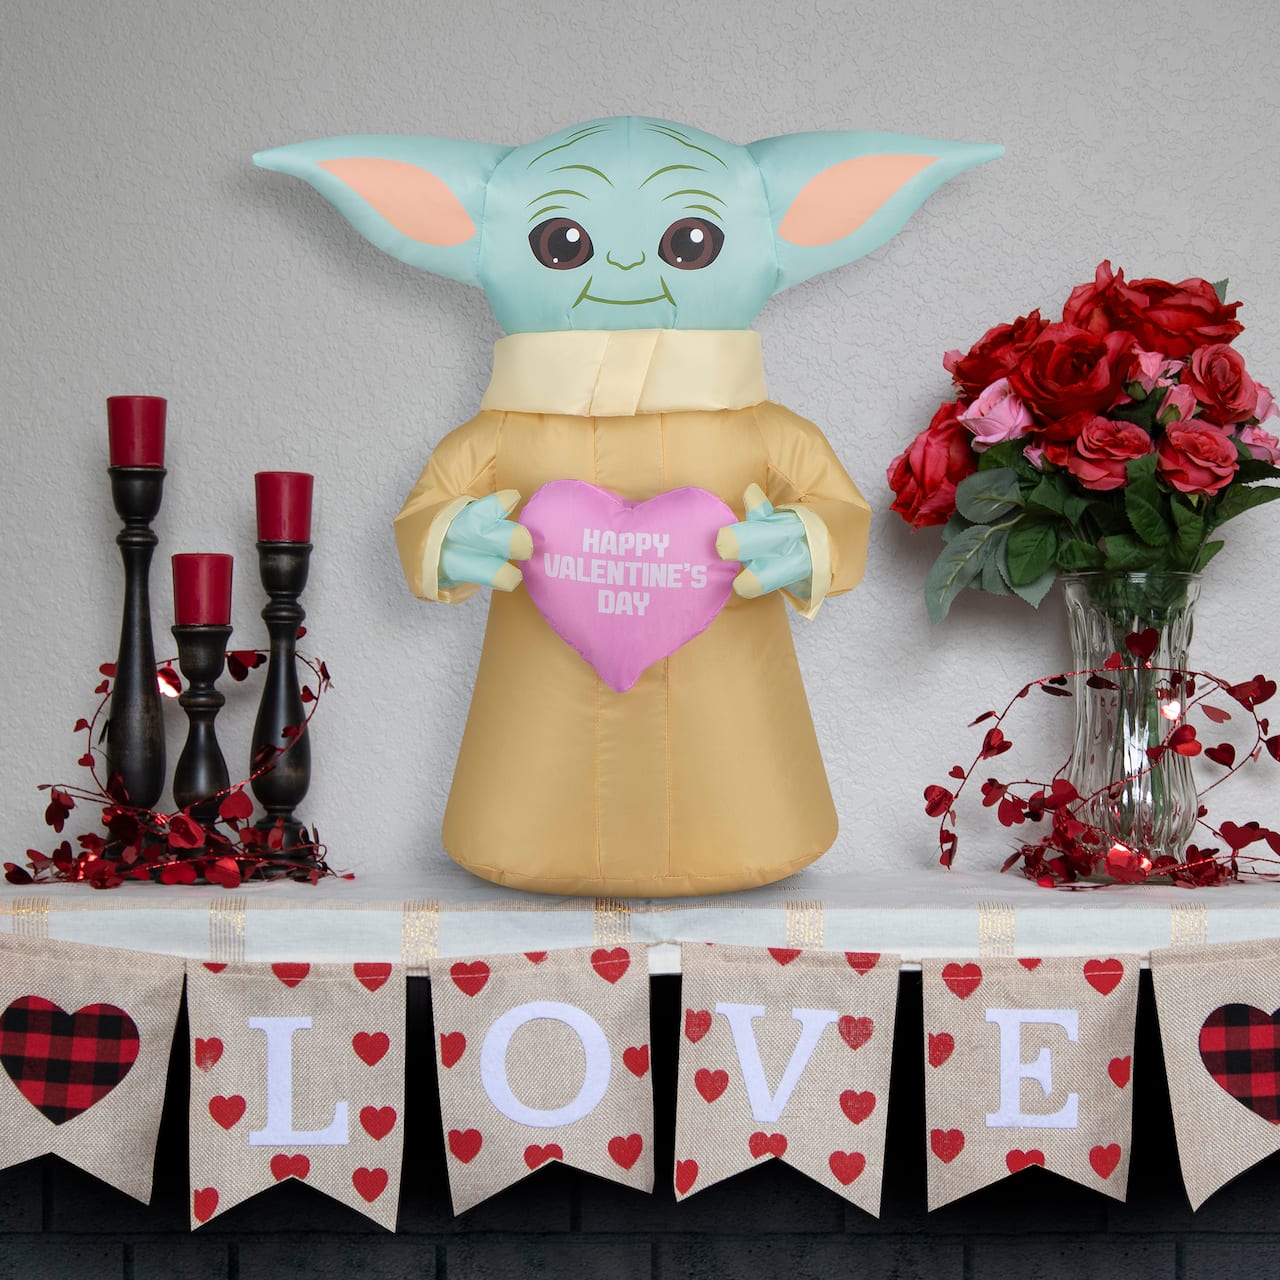 Happy Valentine's Day 20 in. Baby Yoda Inflatable Decoration